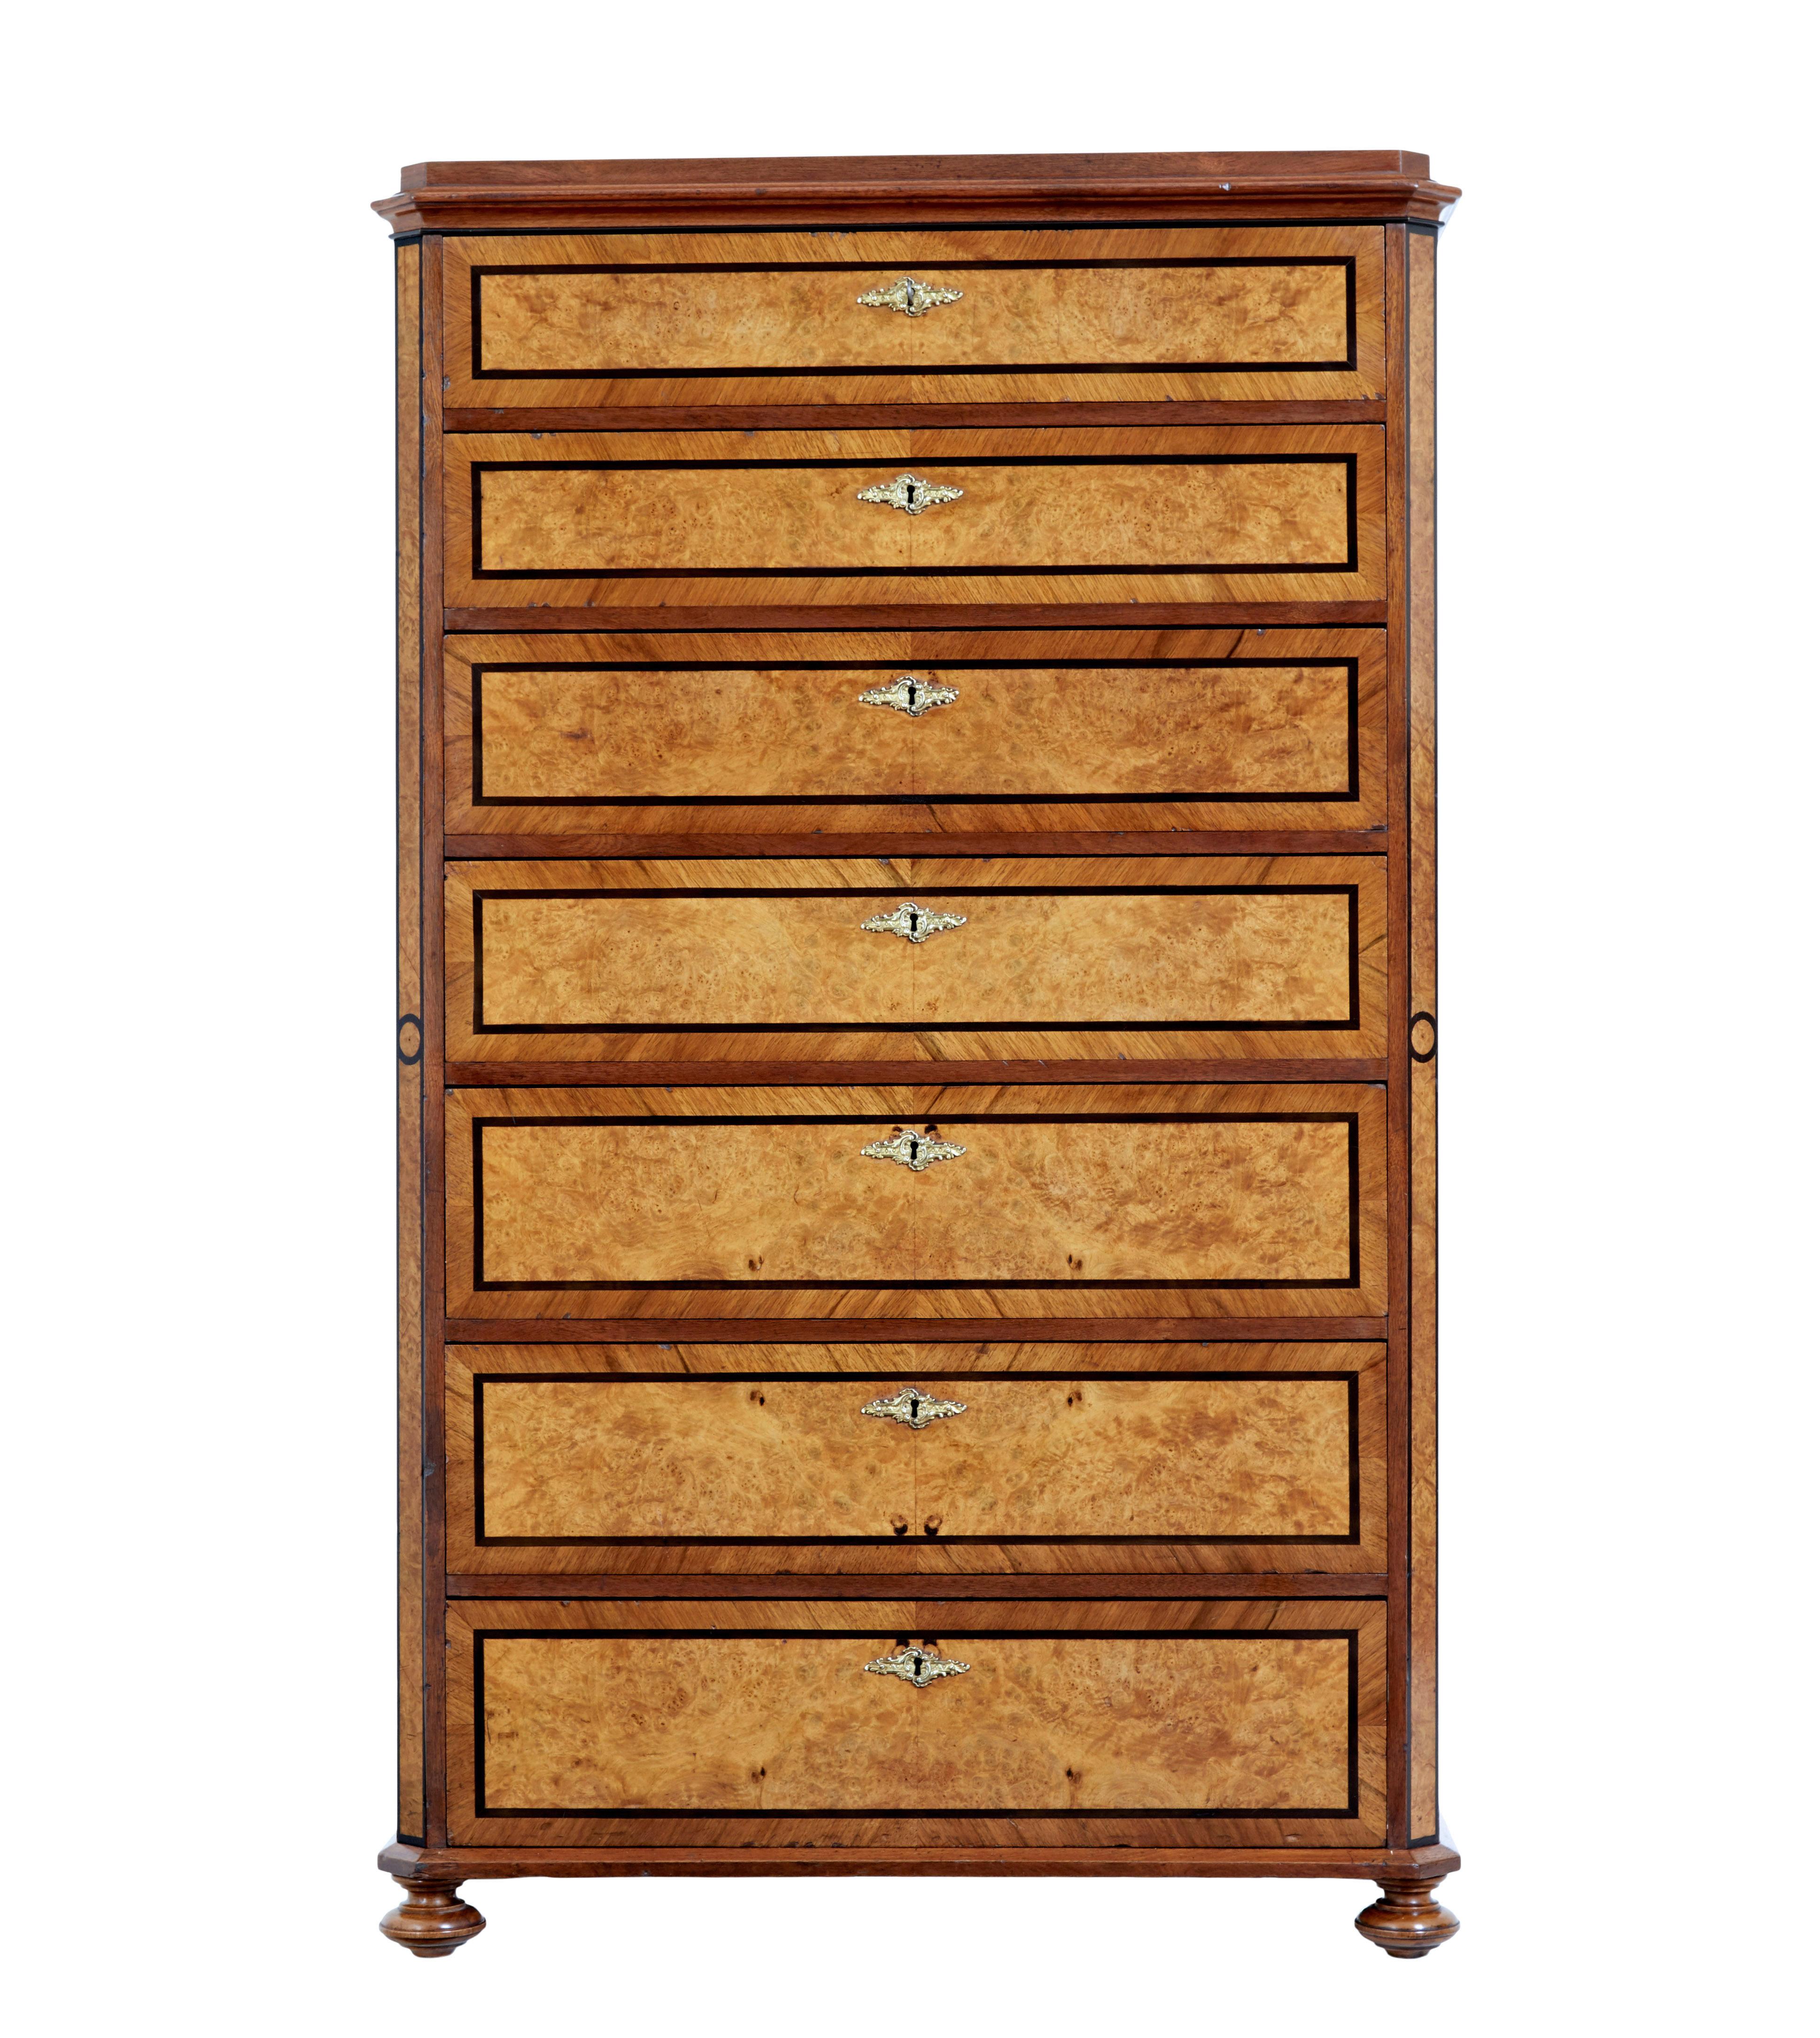 19th century burr walnut tall chest of drawers circa 1880.

Great quality tall chest of drawers often known as a seminere chest as it has 7 drawers.

Shaped walnut top surface with matching coloured sides which provide a delightful contrast to the